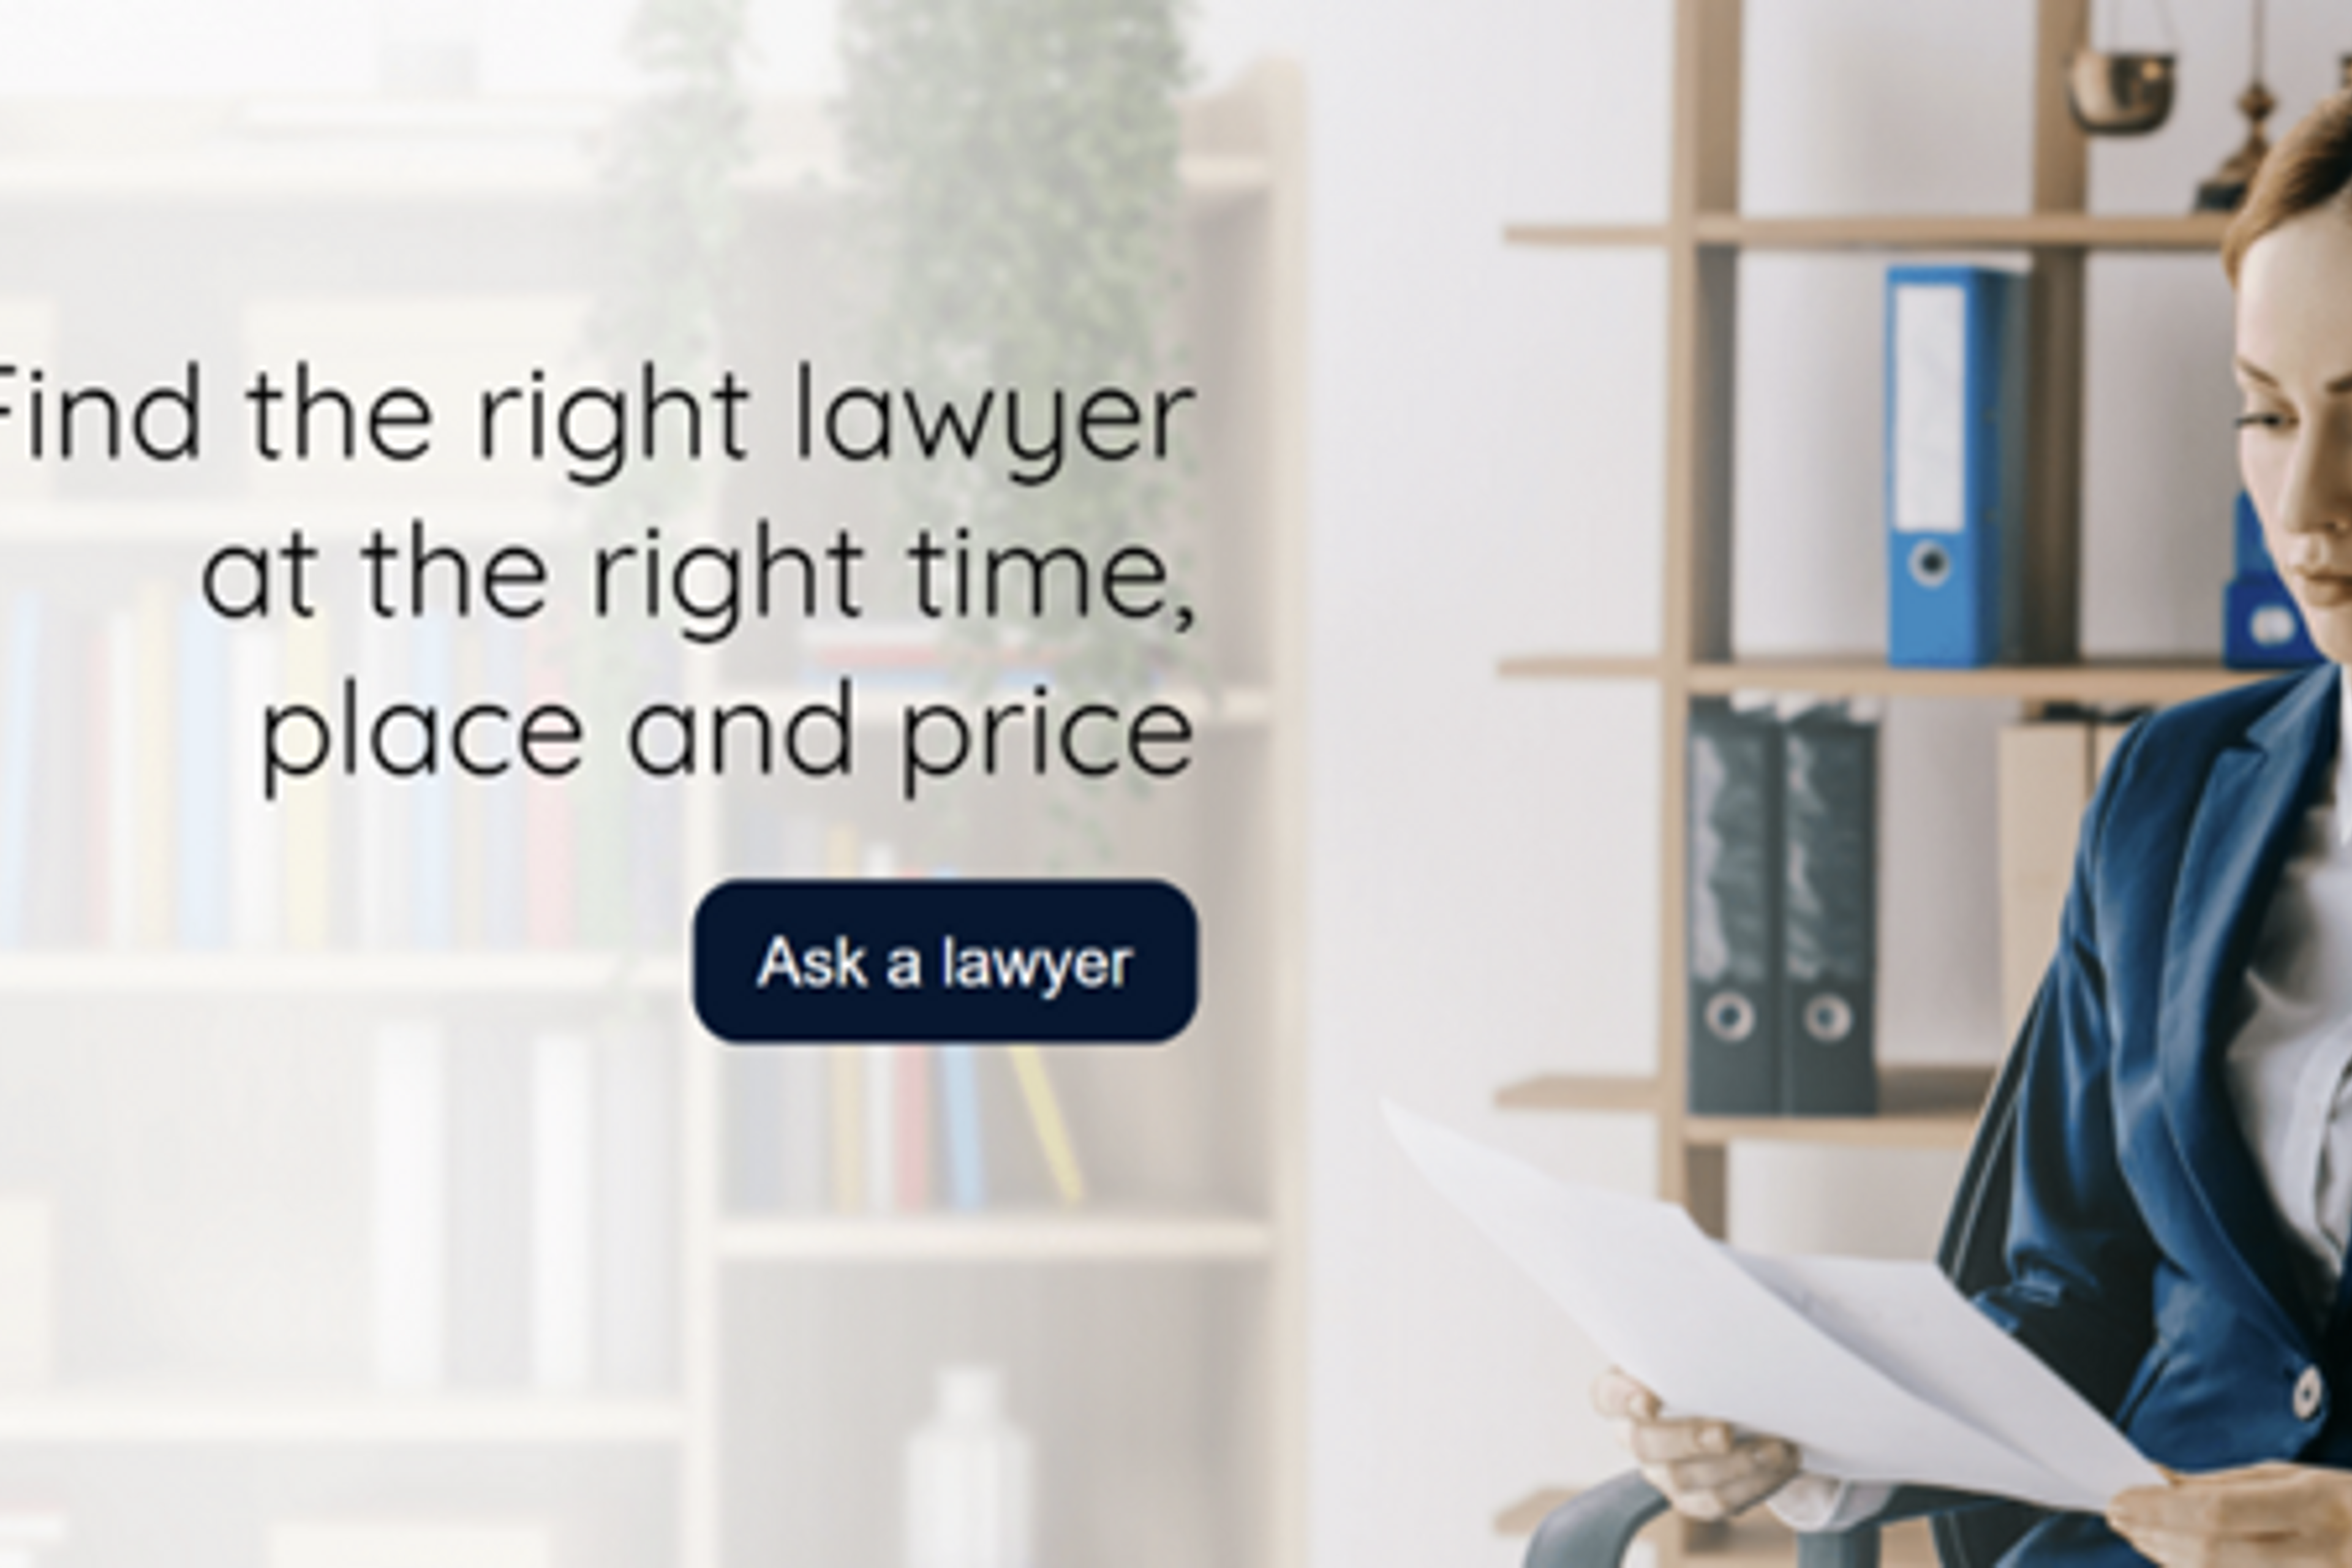 A photo of a woman reading some papers with the text "Find the right lawyer at the right time, place and price